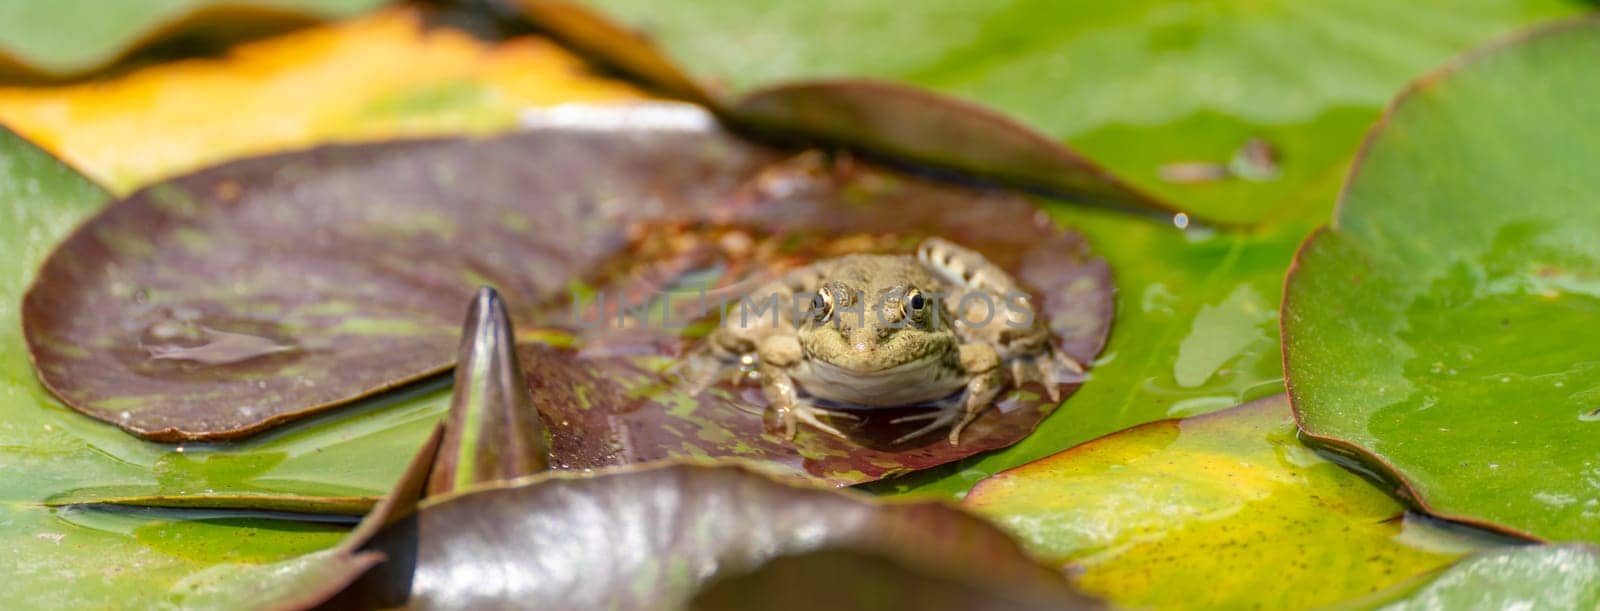 frog leaf water lily banner. A small green frog is sitting at the edge of water lily leaves in a pond by Matiunina